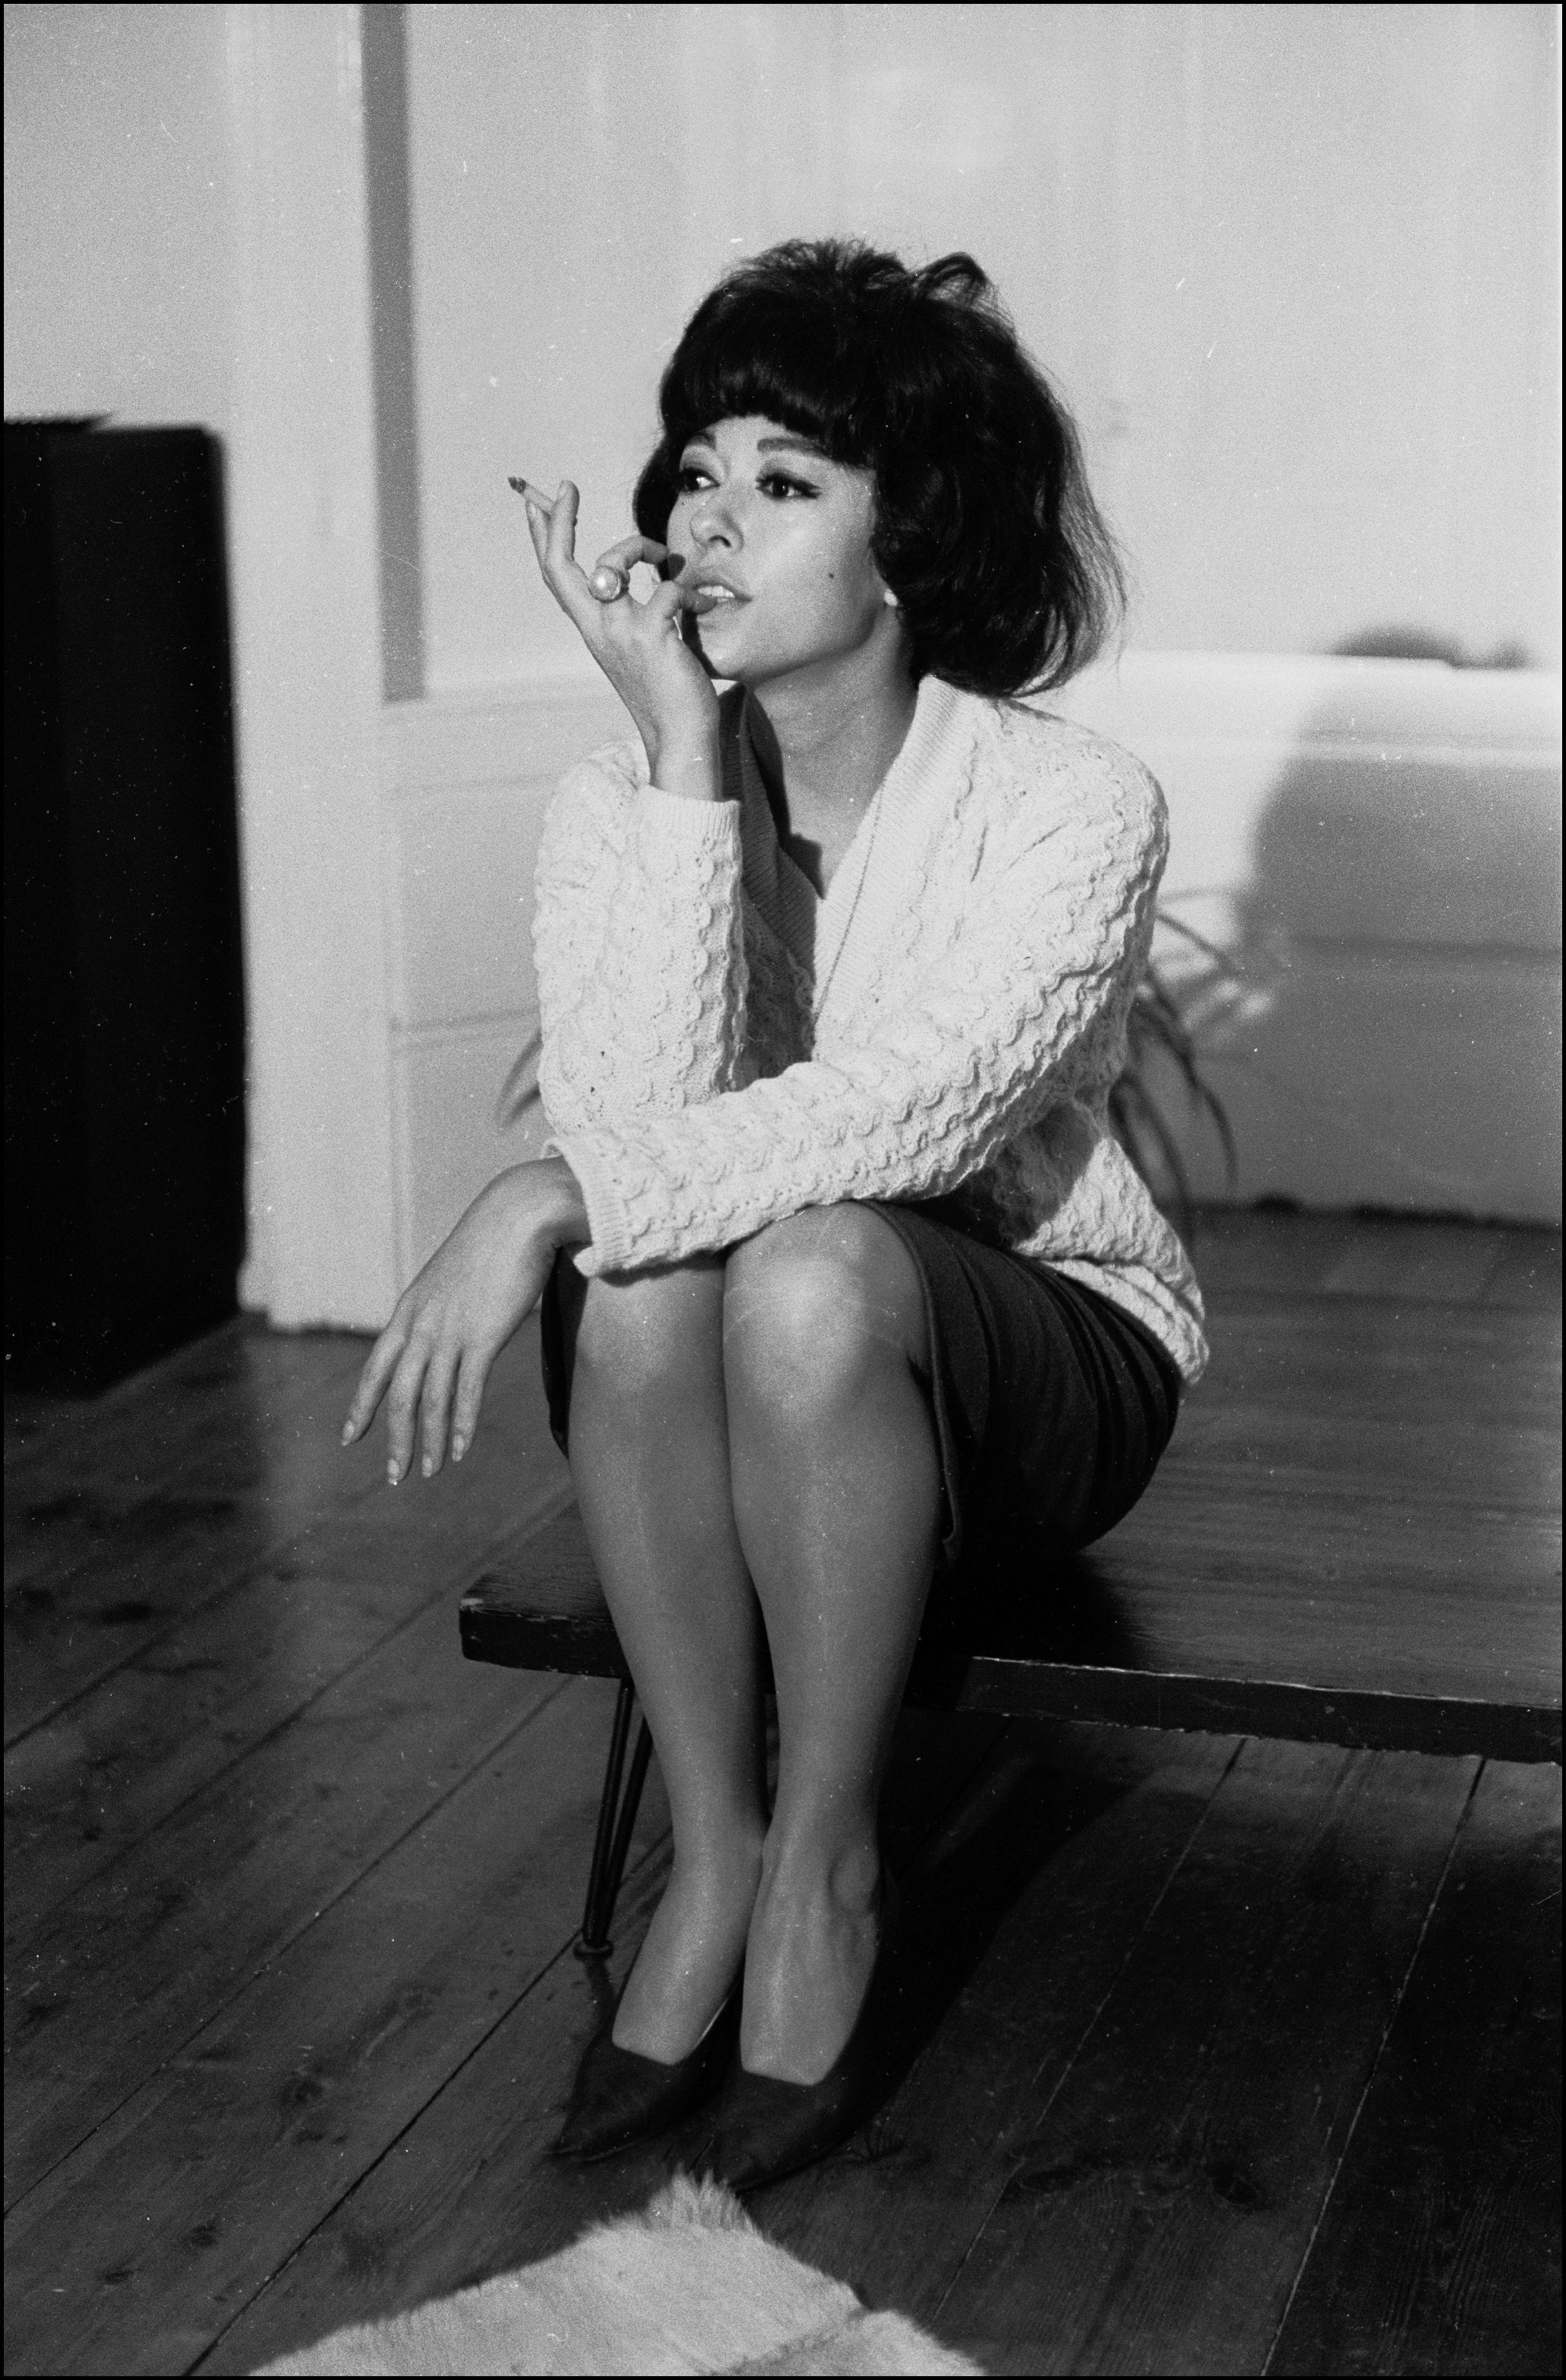 Rita sitting on a table holding a cigarette